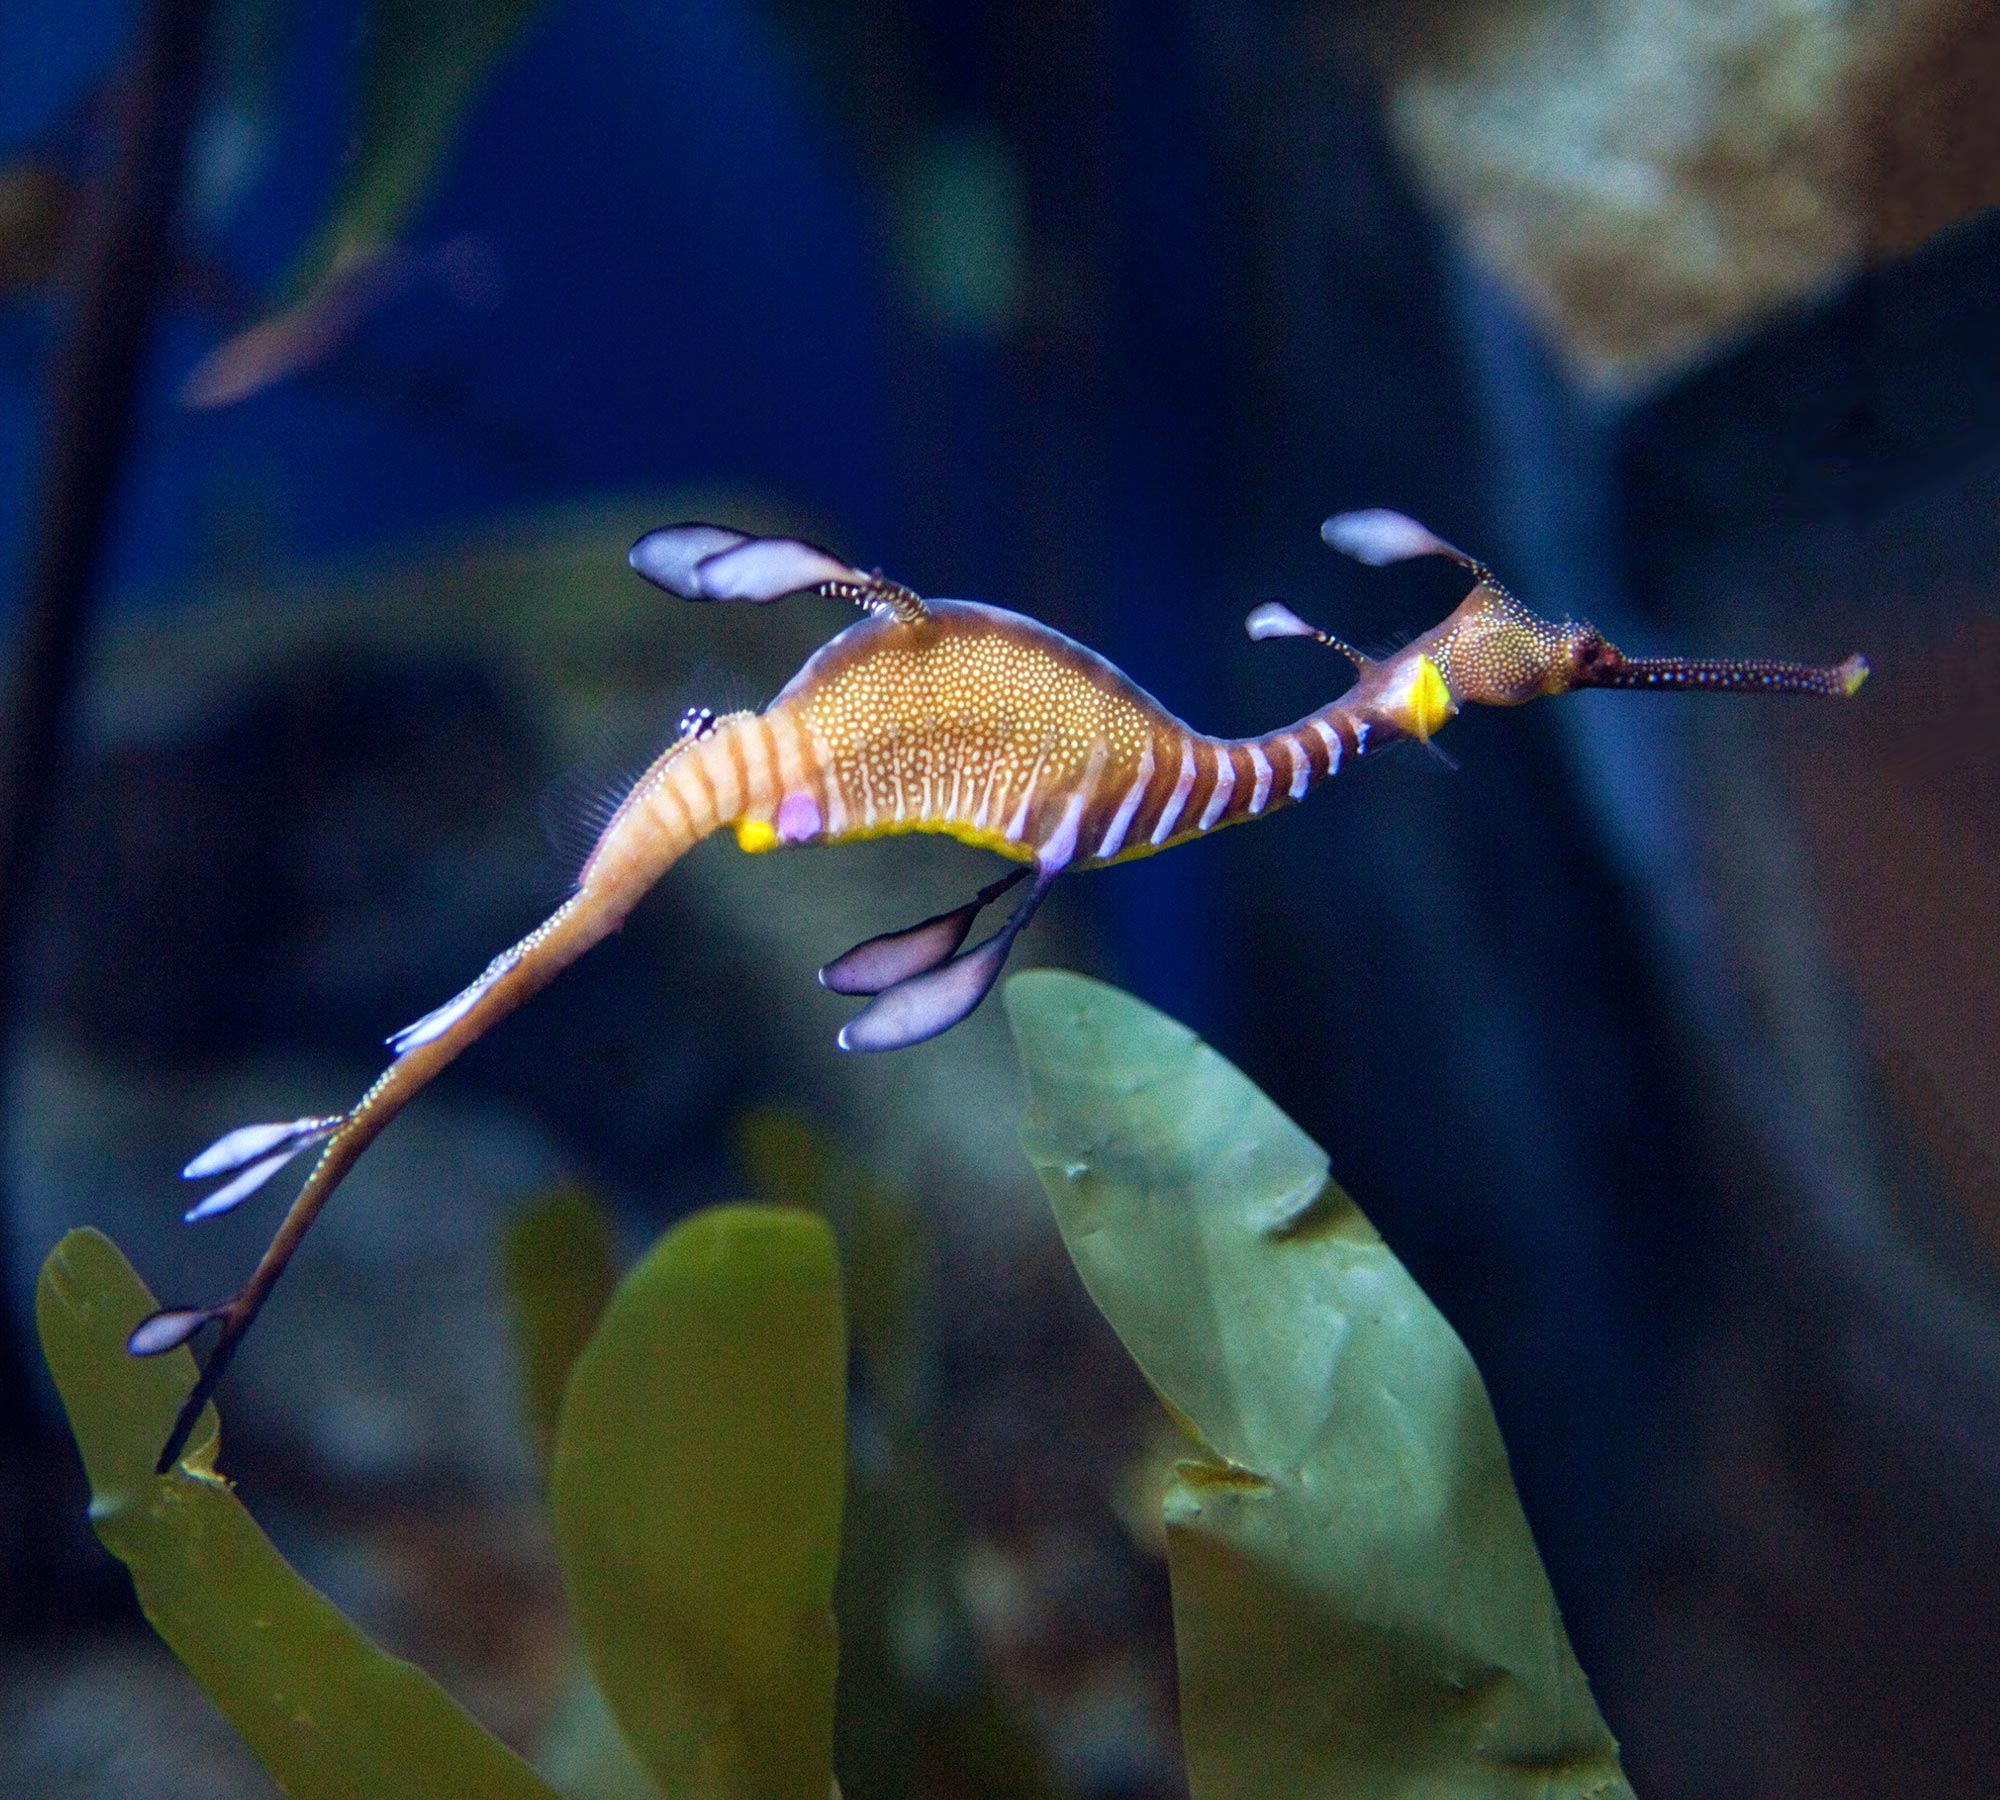 Genetic Mystery of the Seadragon Solved